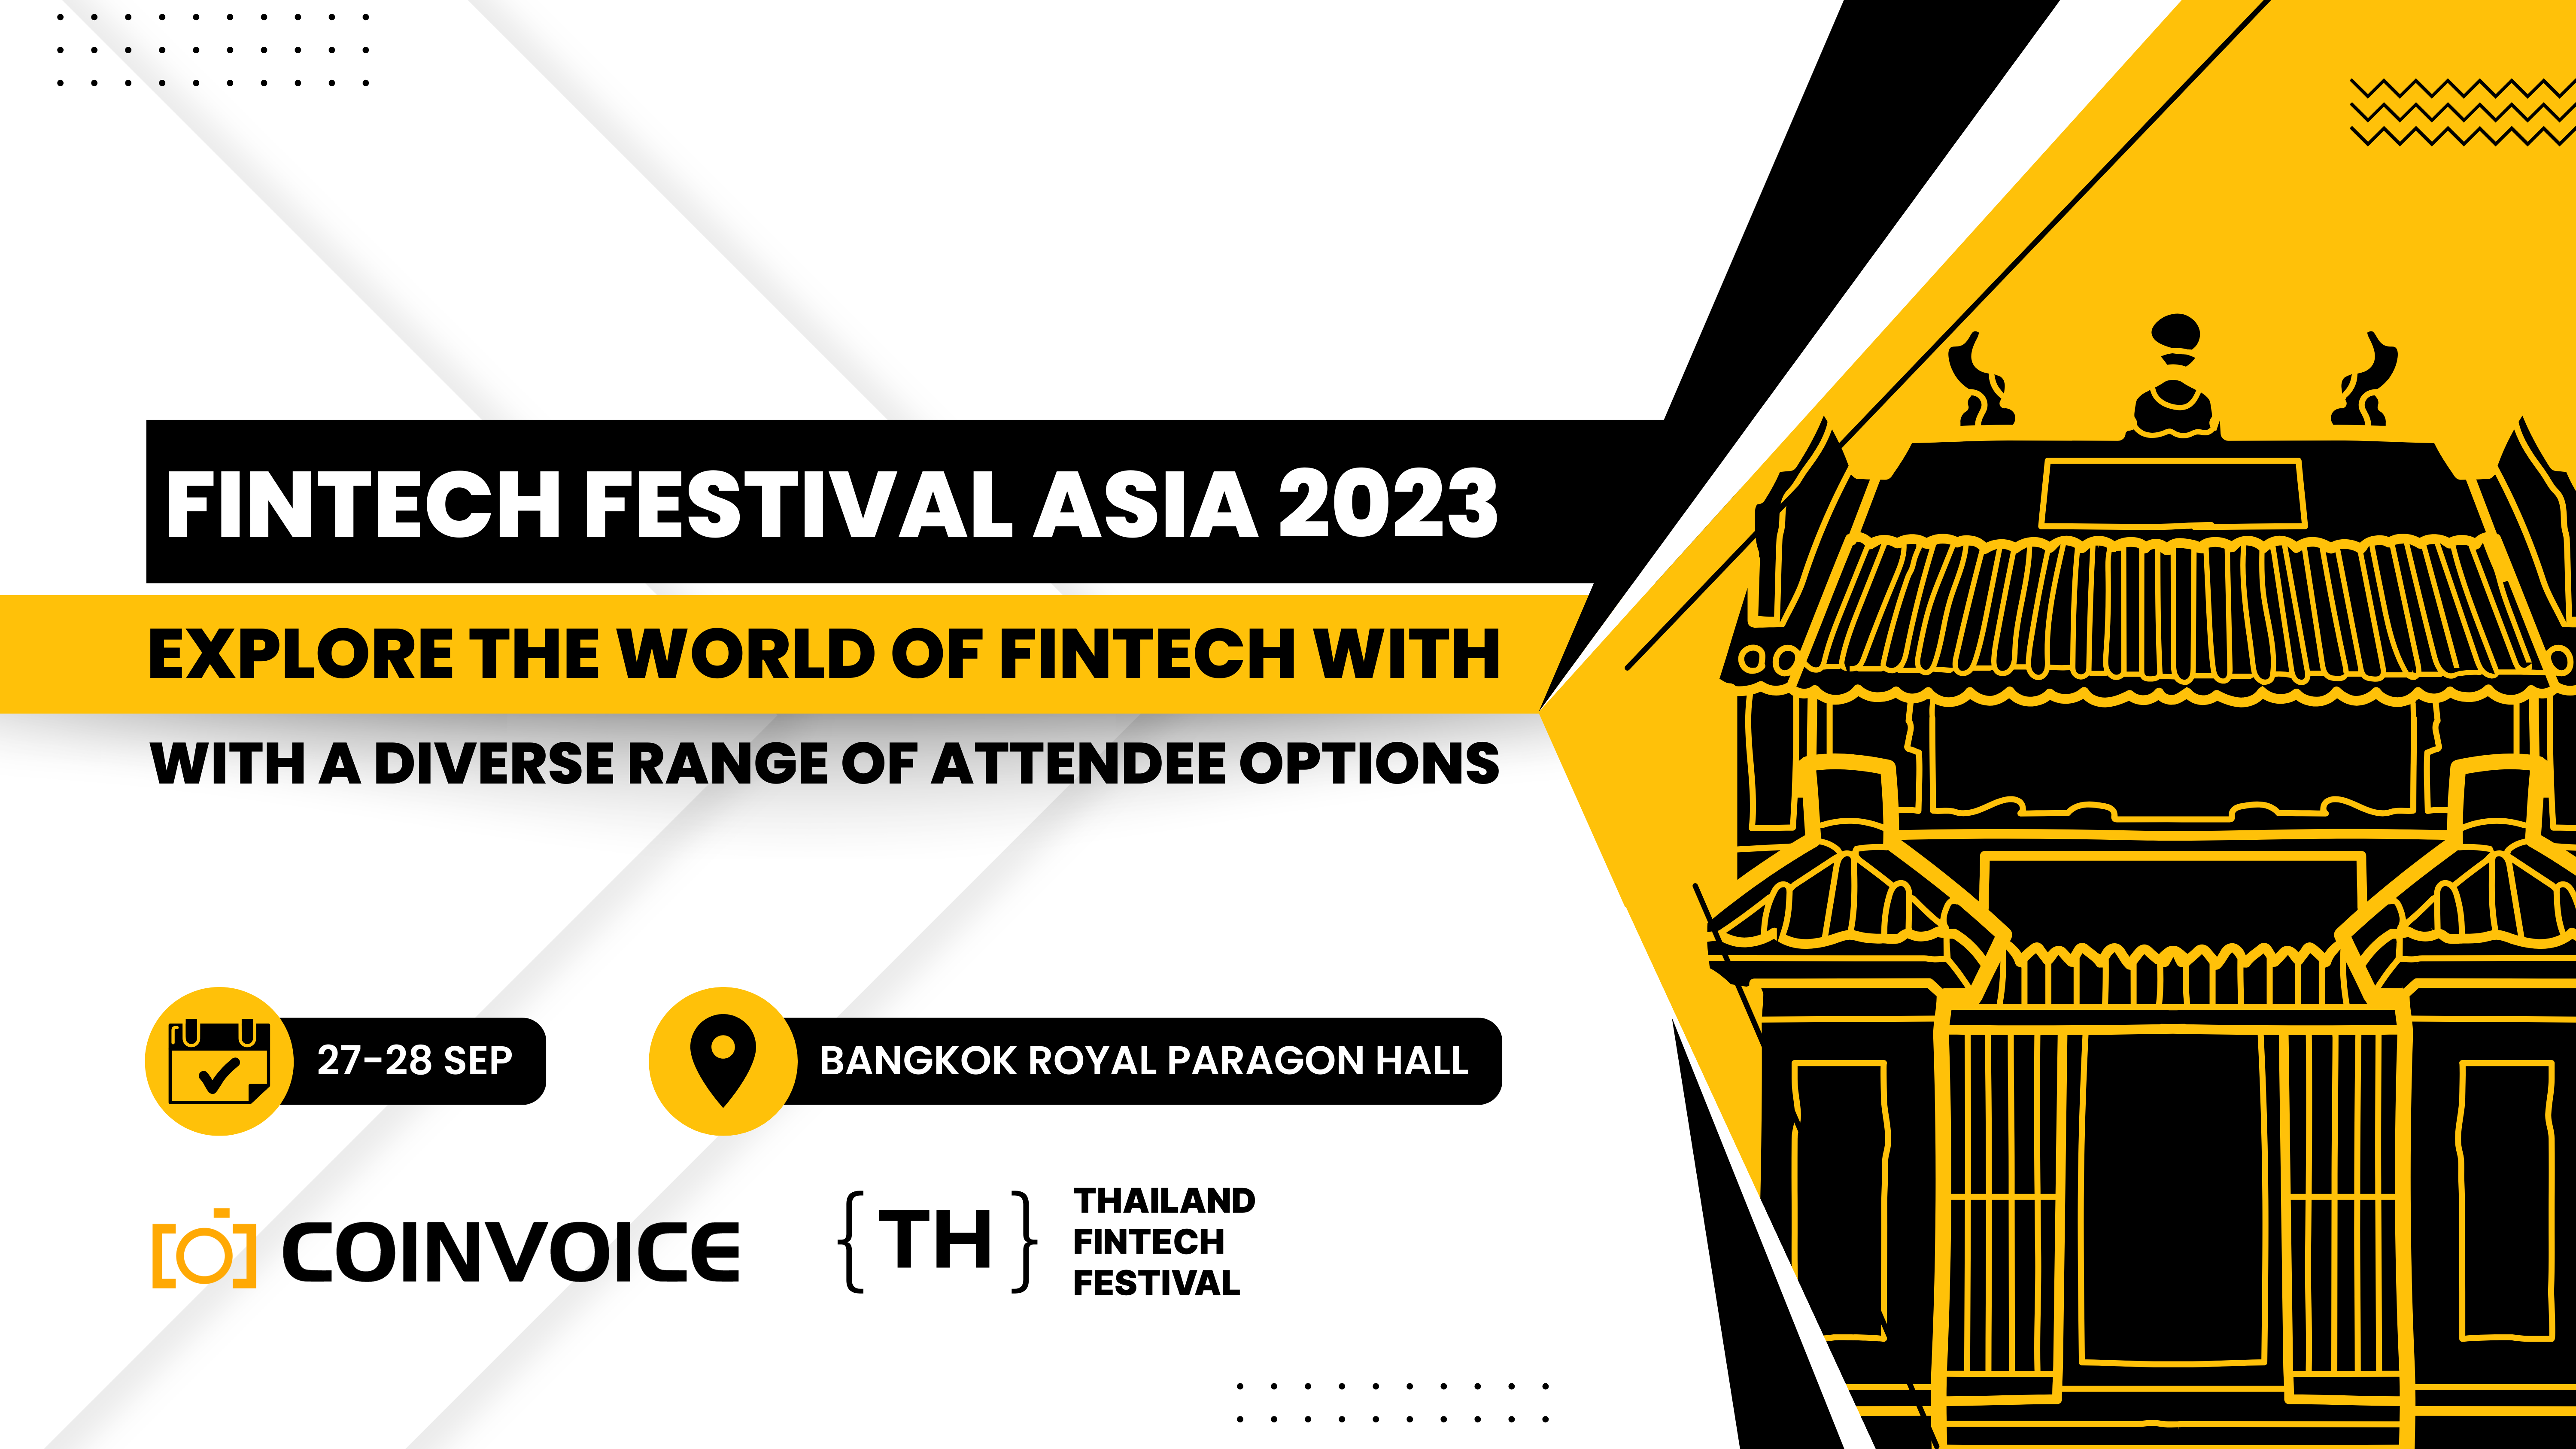 FinTech Festival Asia 2023: Explore the World of FinTech with a Diverse Range of Attendee Options